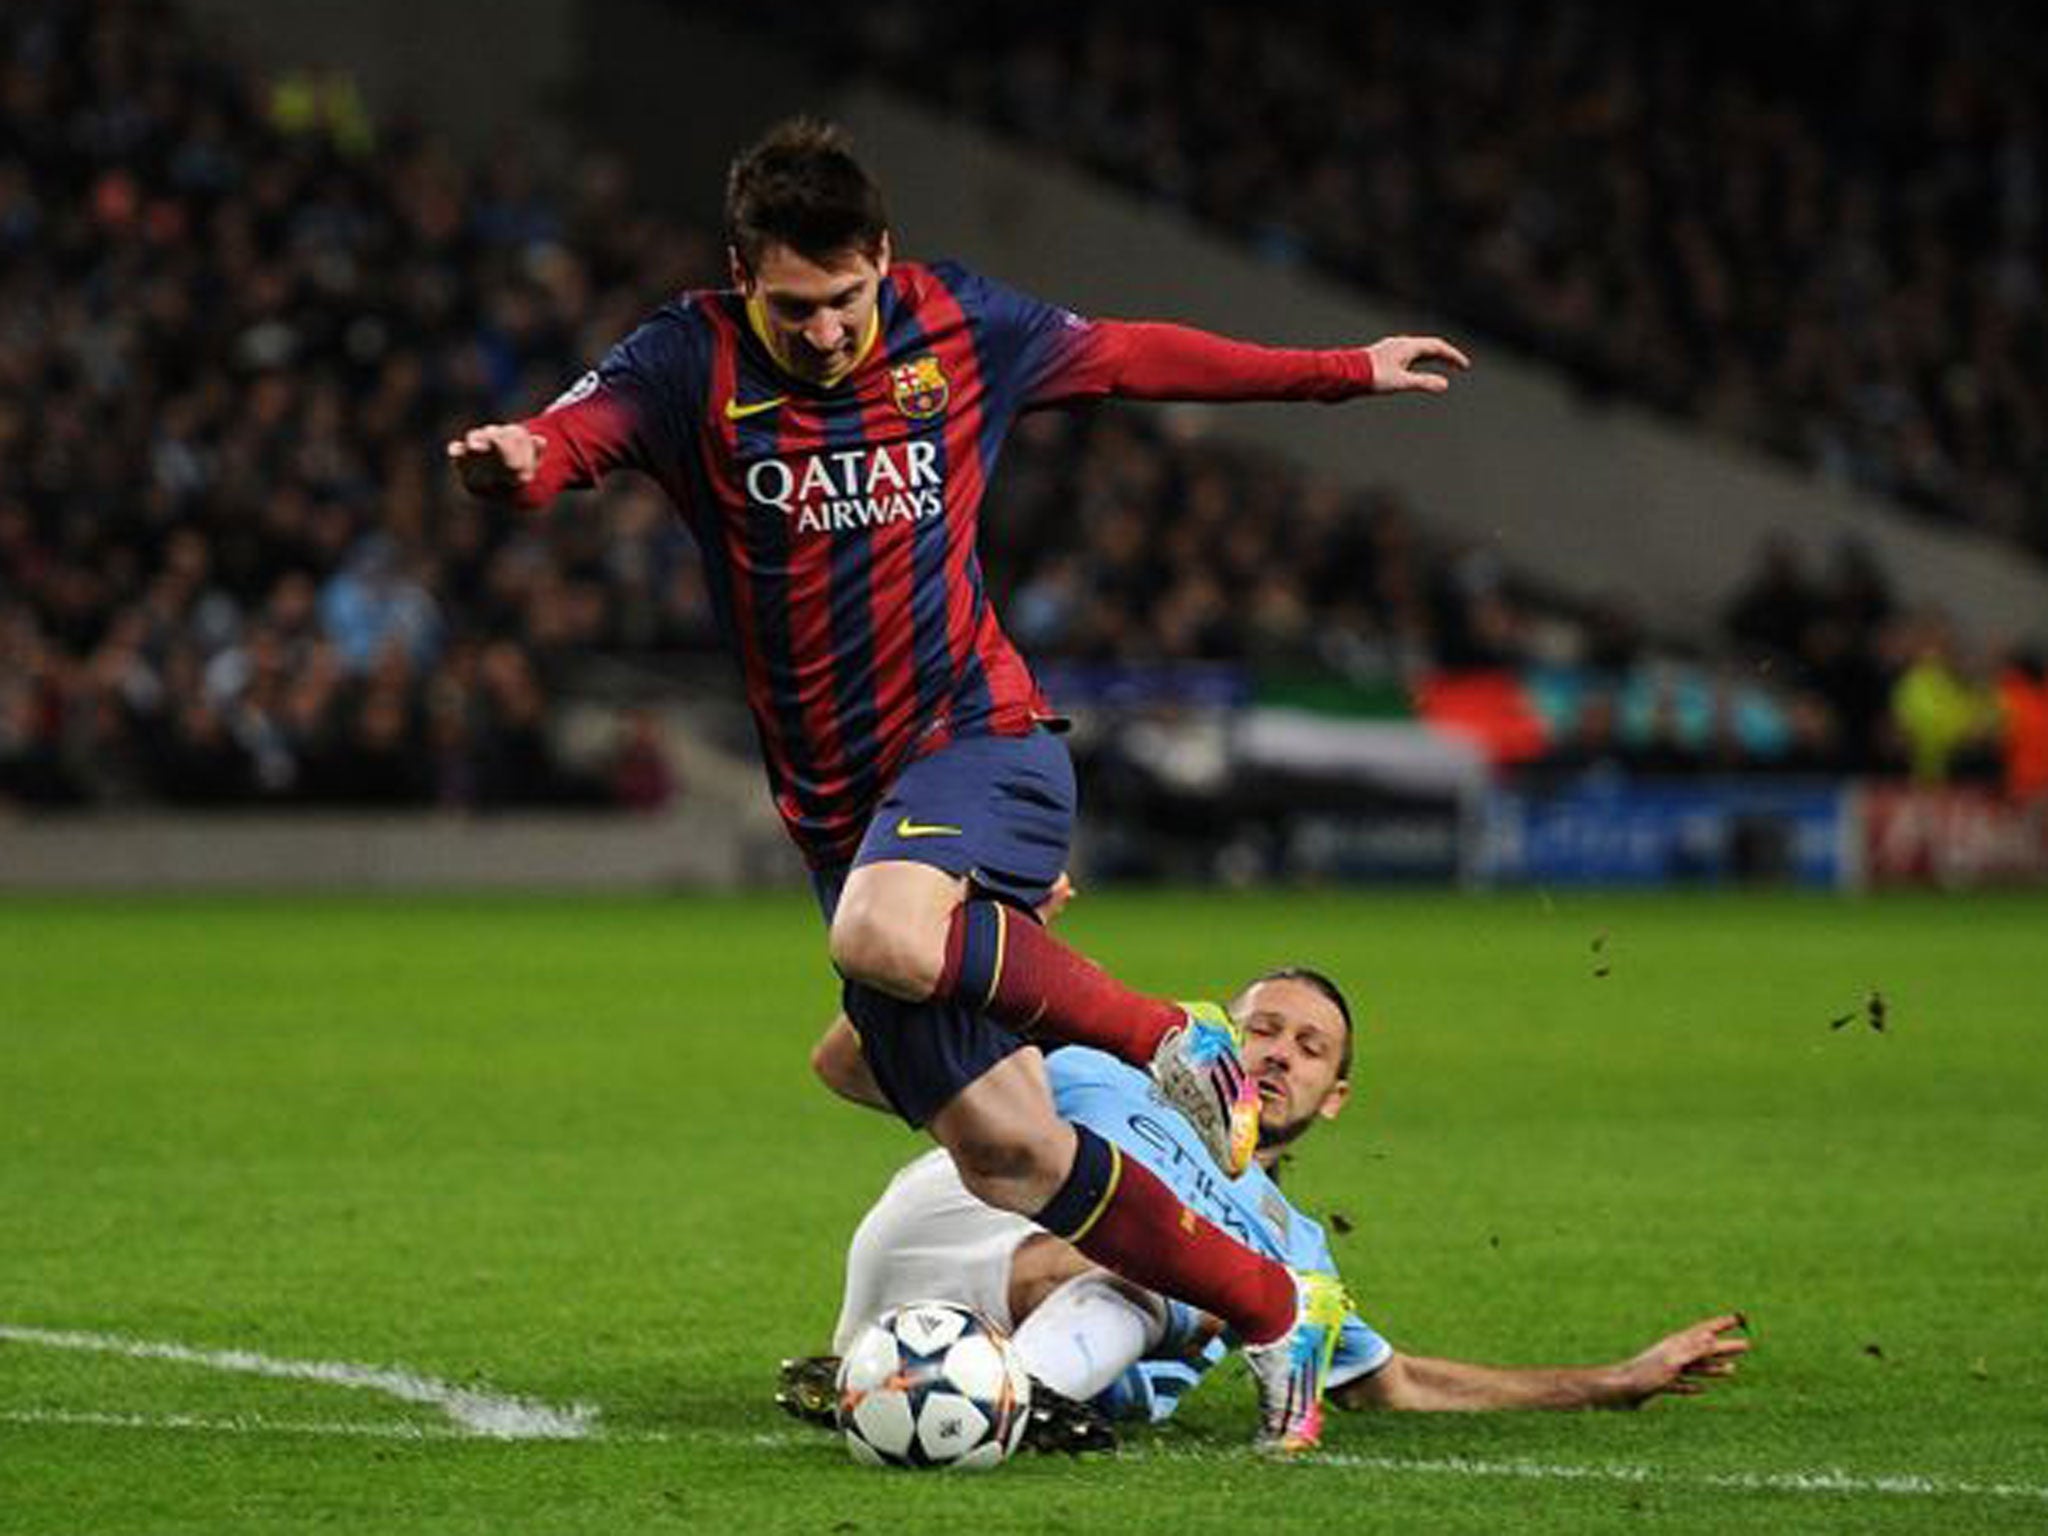 Manchester City's Martin Demichelis brings down Barcelona's Lionel Messi to concede a penalty and receives a red card